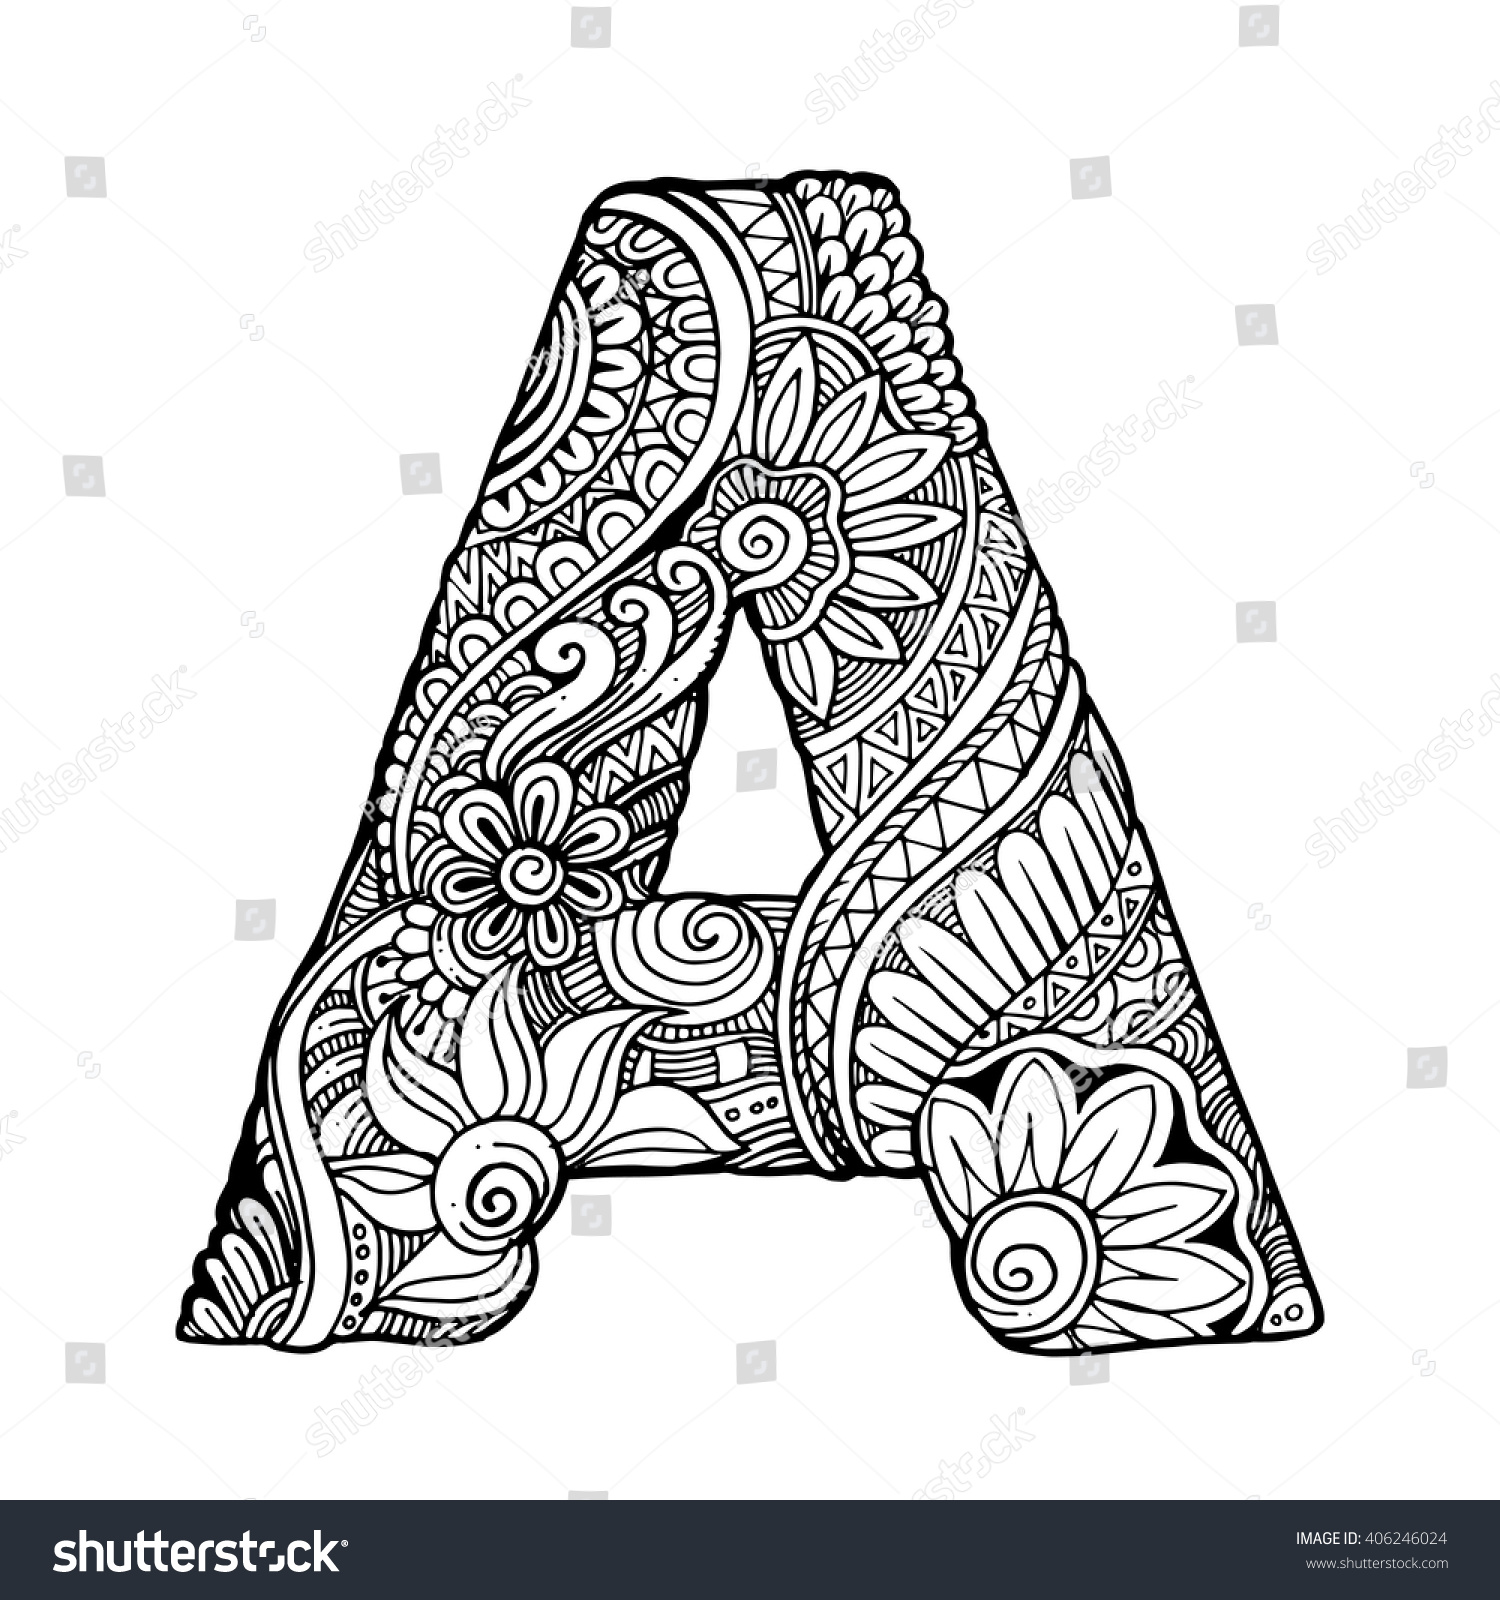 Download Zentangle Stylized Alphabet Letter A Vector Illustration Black White Hand Drawn Doodle Ethnic Pattern African Indian Totem Design Adult Antistress Coloring Page Poster Print T Shirt